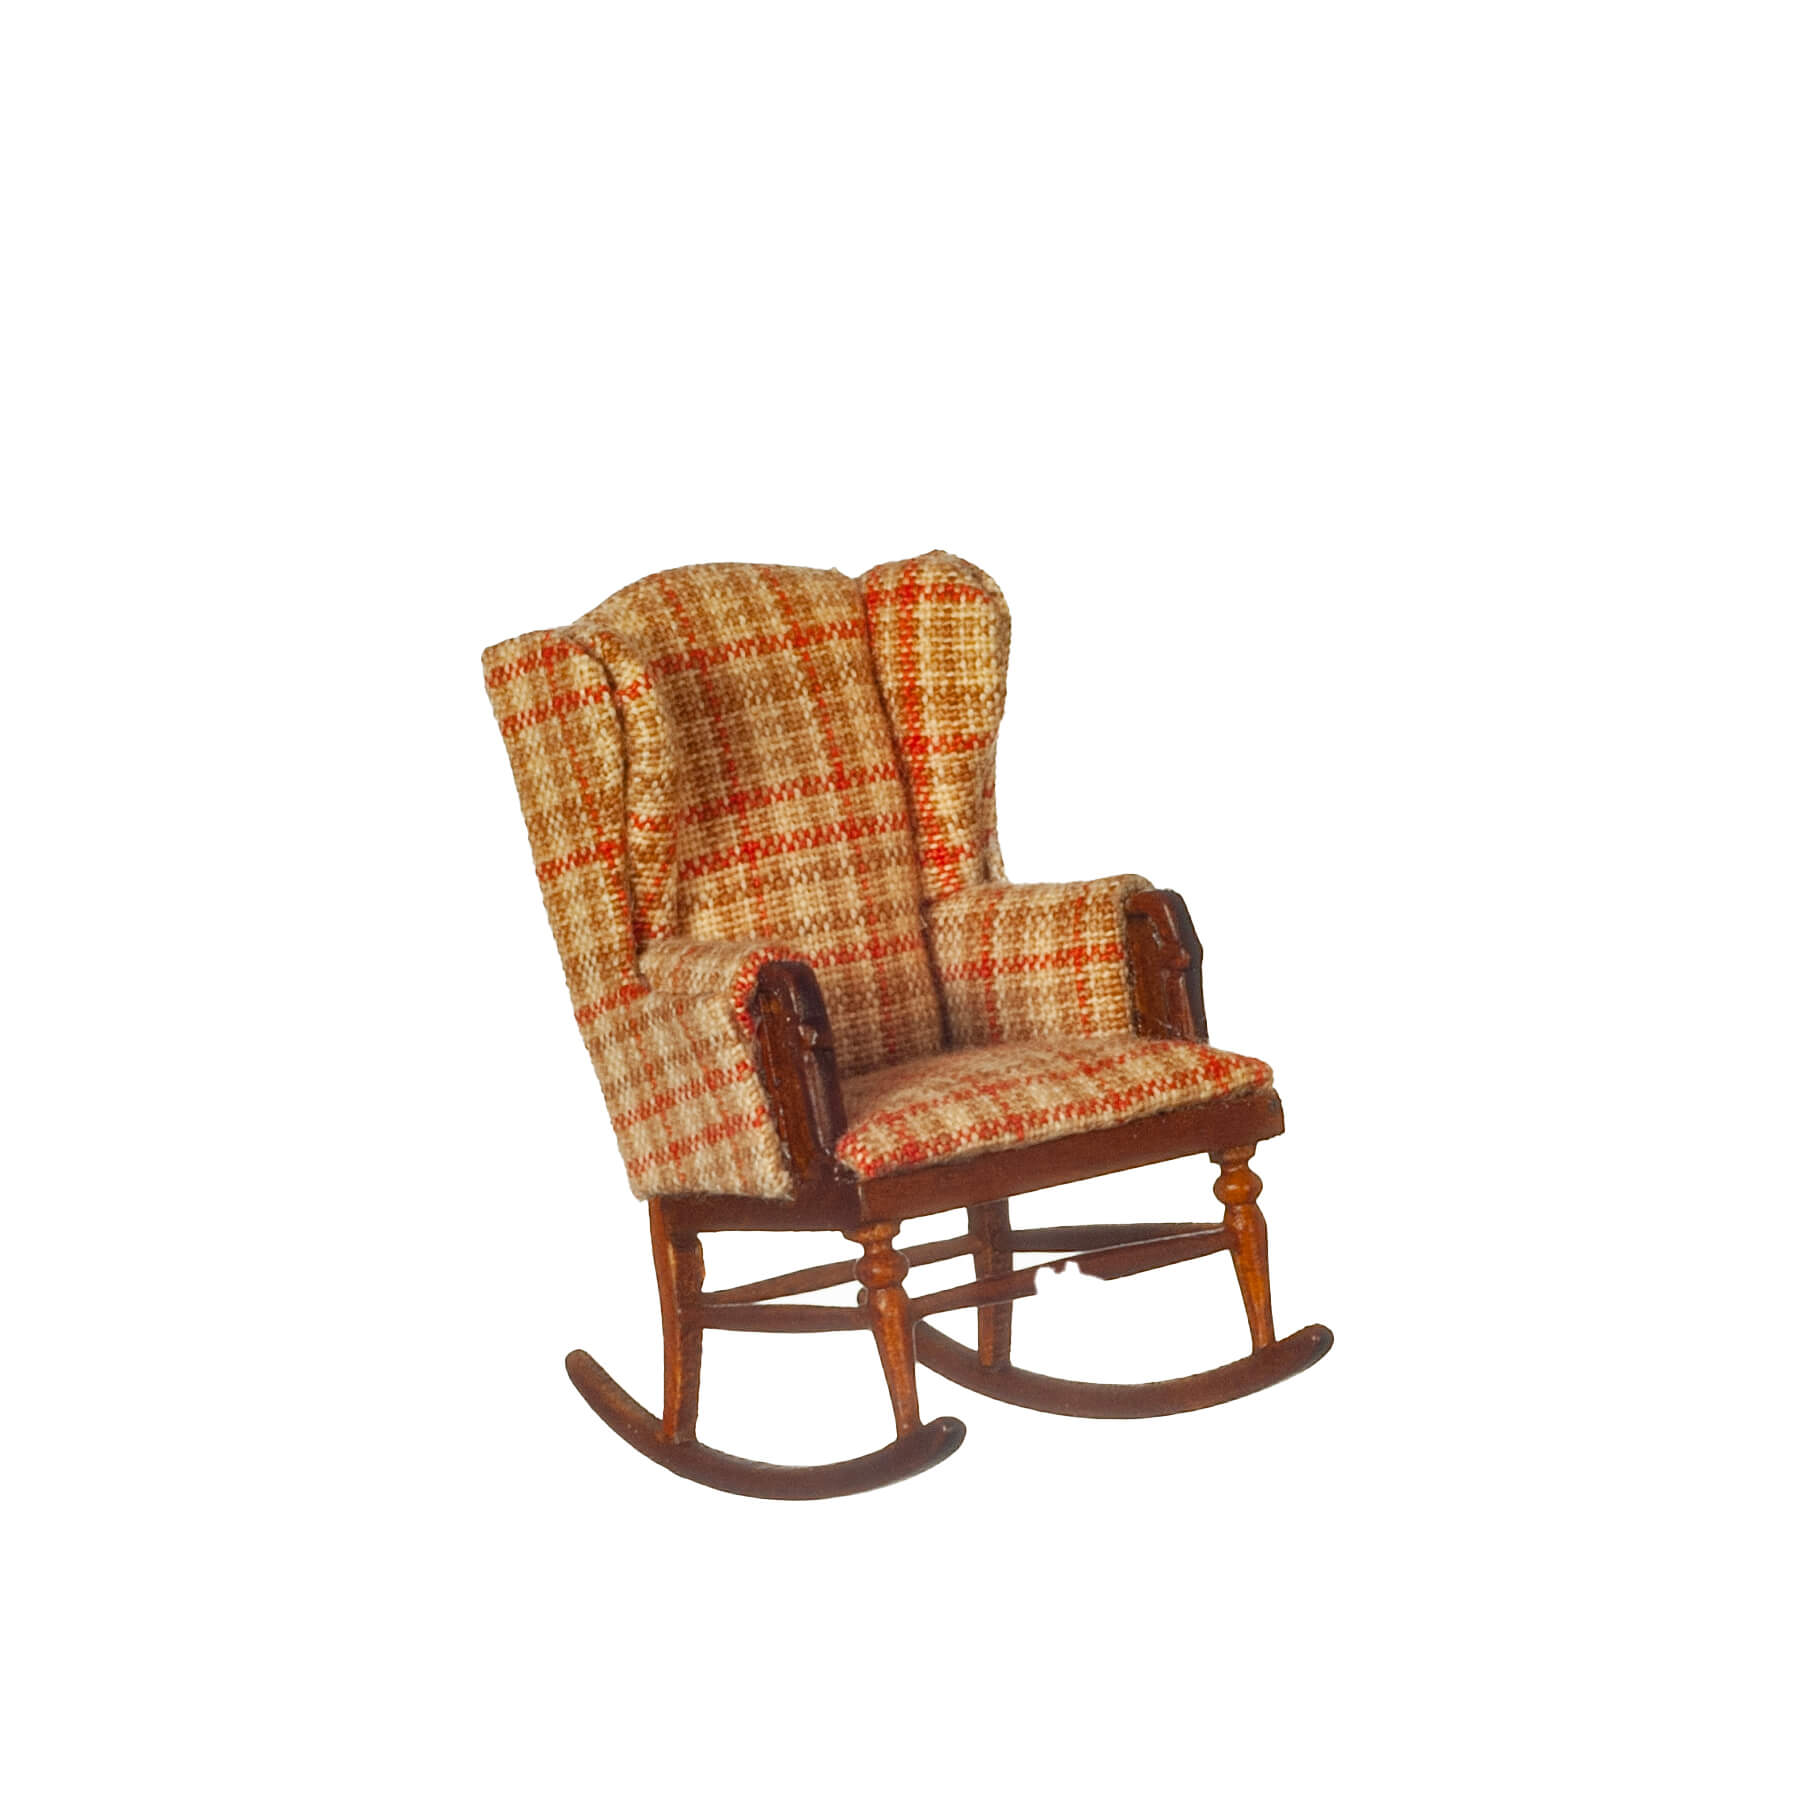 1/2in Scale Upholstered Rocking Chair - Walnut